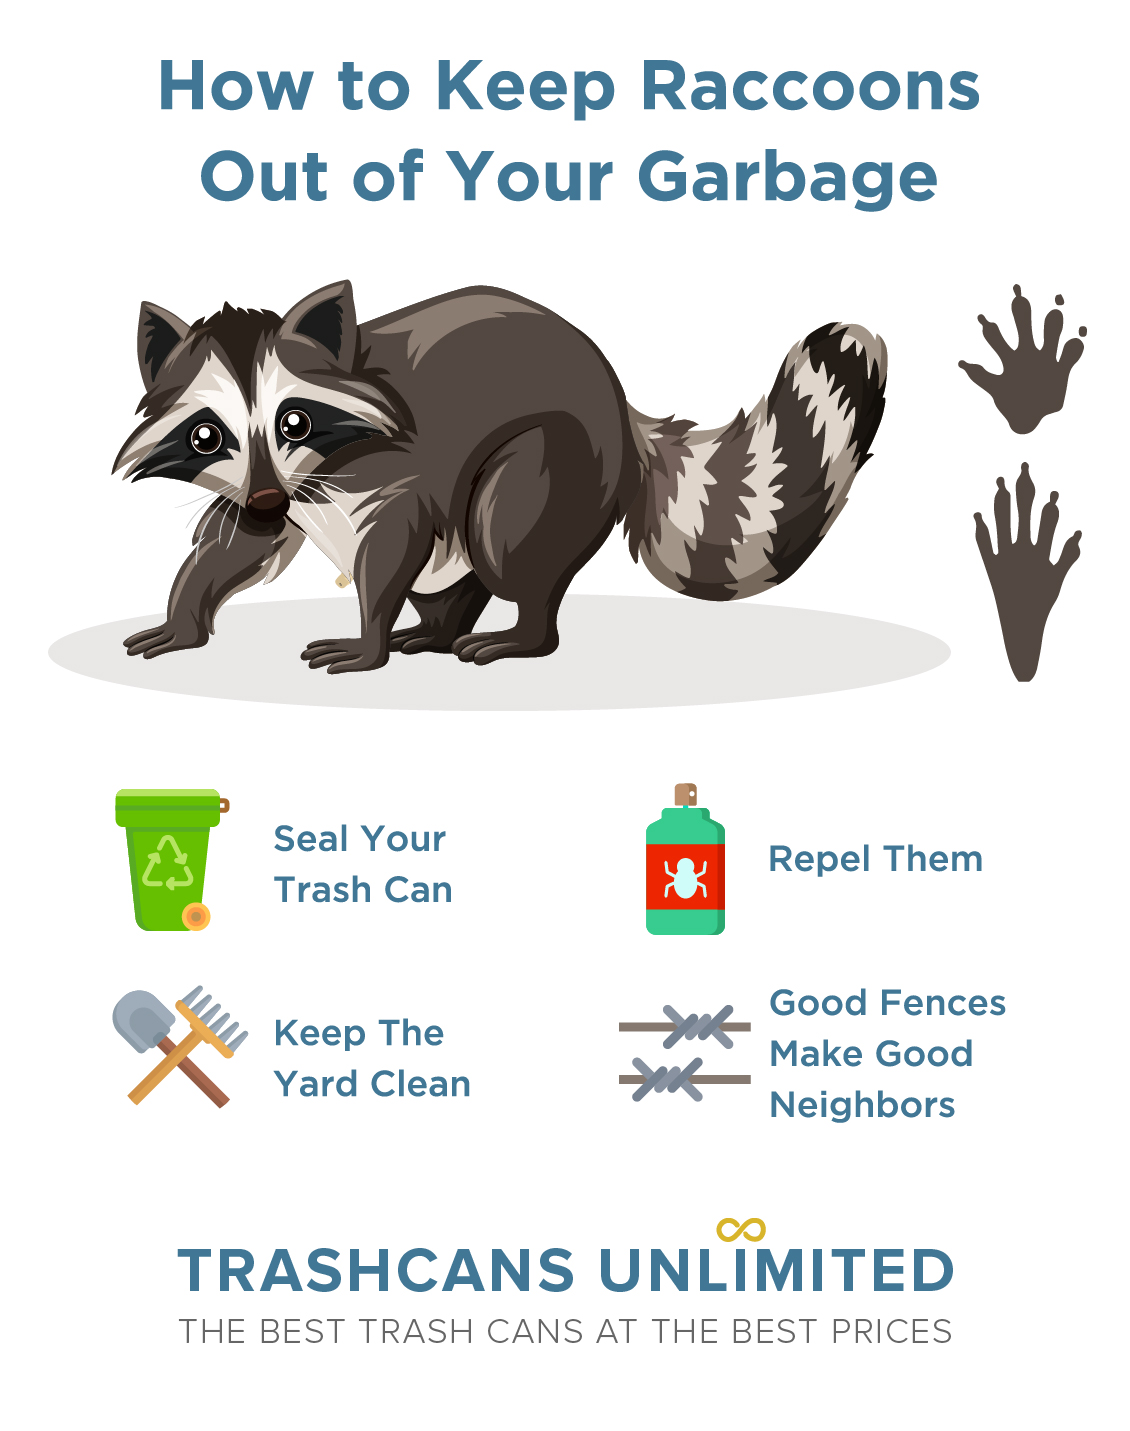 How to Keep Raccoons Out of Your Garbage